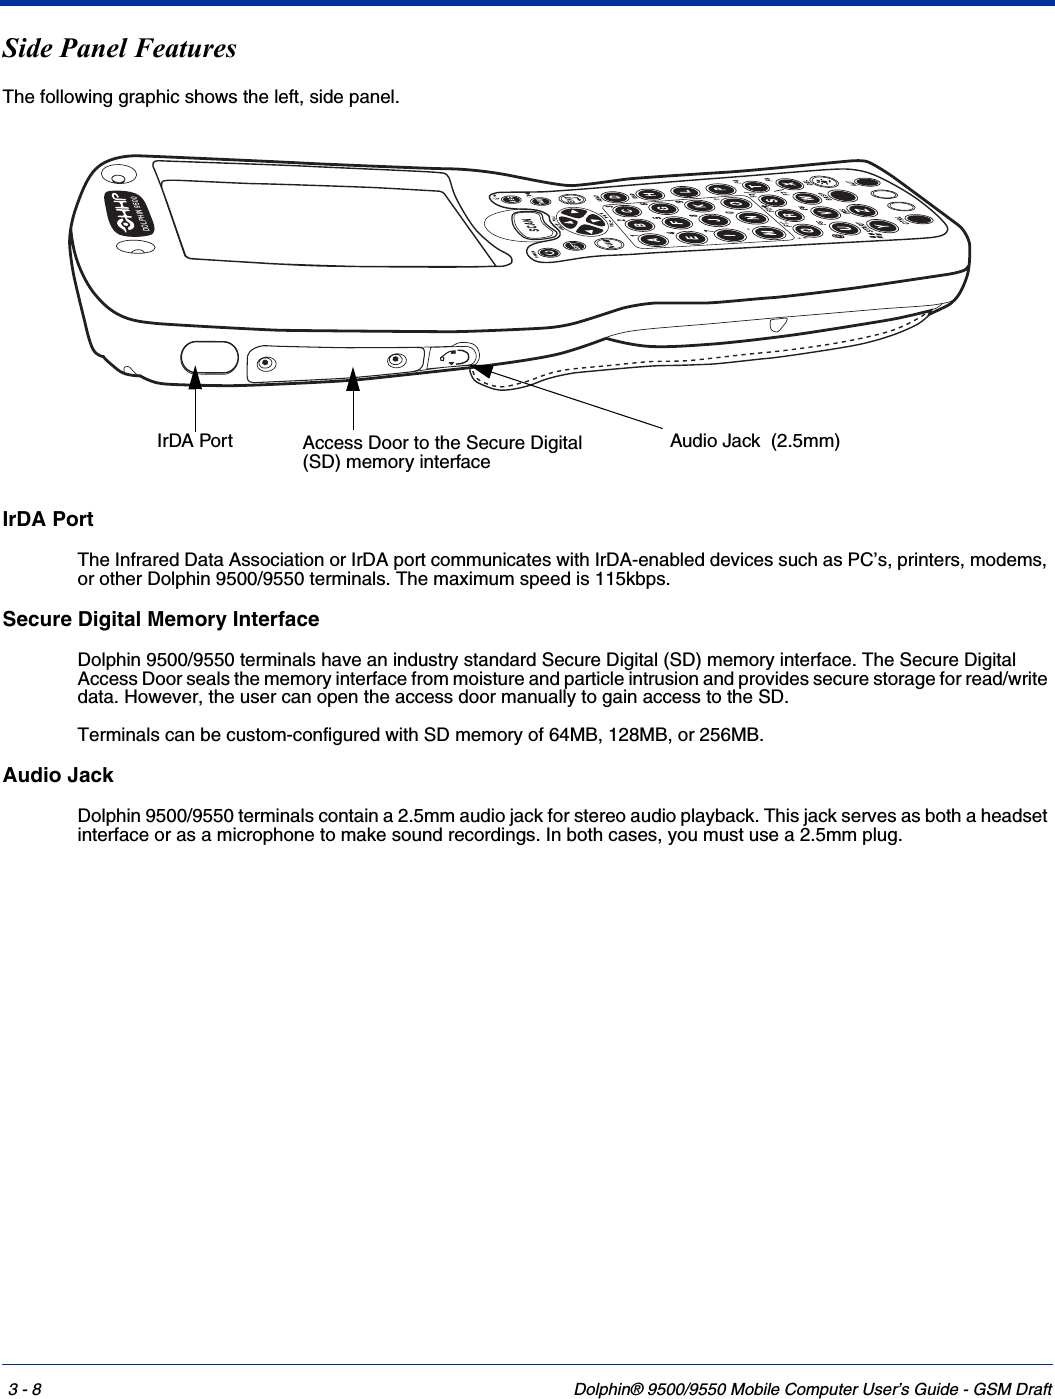 3 - 8 Dolphin® 9500/9550 Mobile Computer User’s Guide - GSM DraftSide Panel FeaturesThe following graphic shows the left, side panel.IrDA PortThe Infrared Data Association or IrDA port communicates with IrDA-enabled devices such as PC’s, printers, modems, or other Dolphin 9500/9550 terminals. The maximum speed is 115kbps.Secure Digital Memory InterfaceDolphin 9500/9550 terminals have an industry standard Secure Digital (SD) memory interface. The Secure Digital Access Door seals the memory interface from moisture and particle intrusion and provides secure storage for read/write data. However, the user can open the access door manually to gain access to the SD.Terminals can be custom-configured with SD memory of 64MB, 128MB, or 256MB. Audio JackDolphin 9500/9550 terminals contain a 2.5mm audio jack for stereo audio playback. This jack serves as both a headset interface or as a microphone to make sound recordings. In both cases, you must use a 2.5mm plug.DOLPHIN9500IrDA Port Audio Jack  (2.5mm)Access Door to the Secure Digital (SD) memory interface 